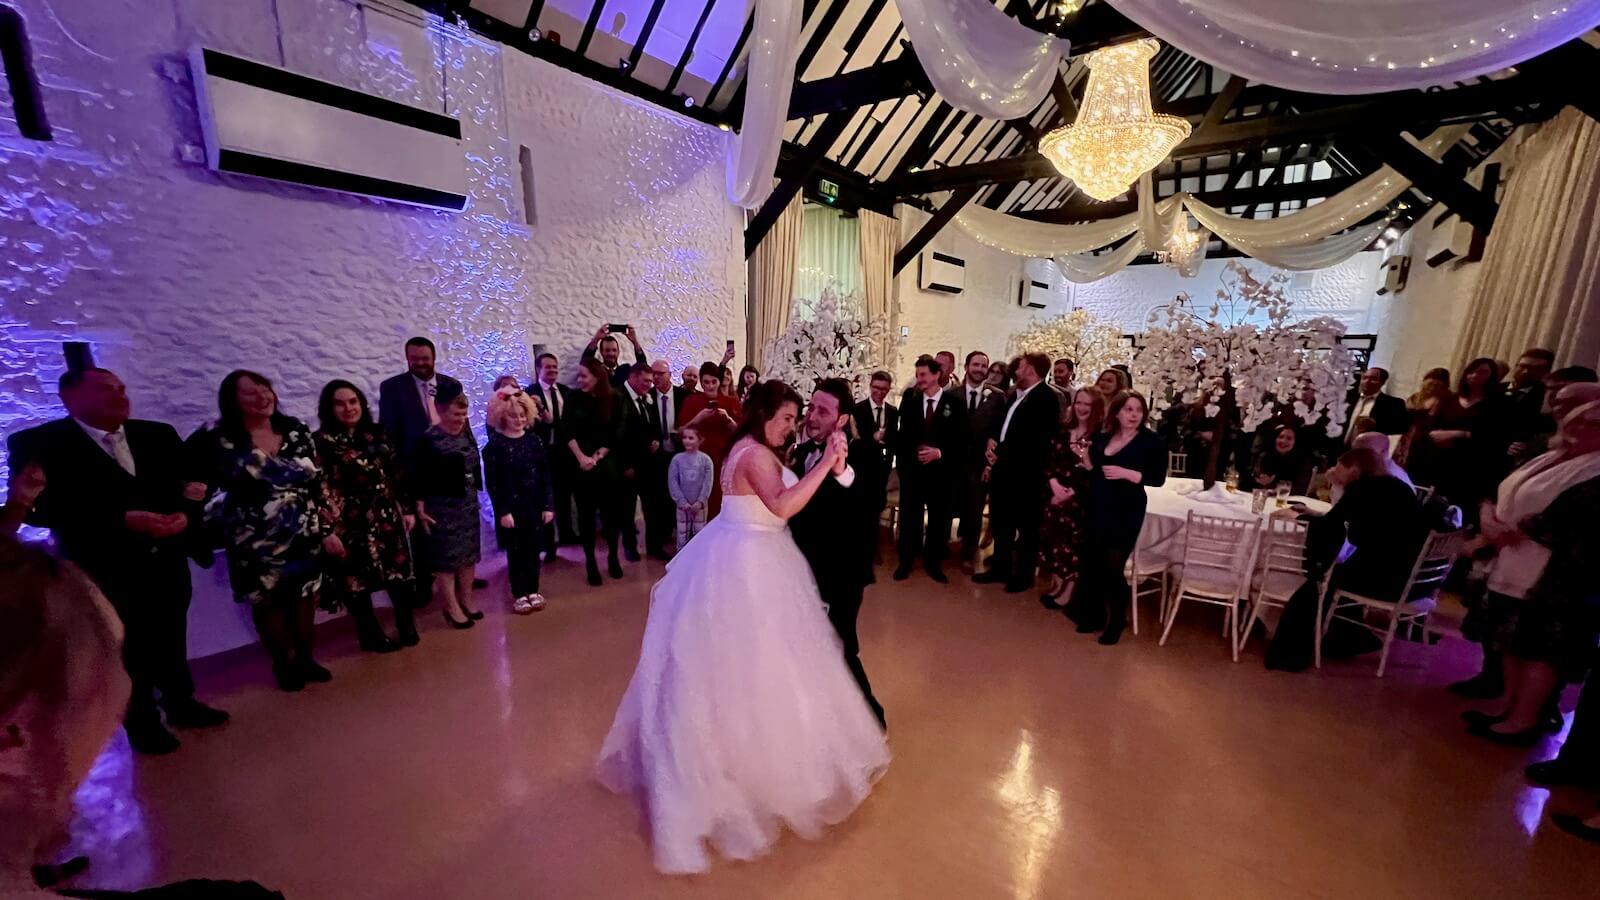 Felicity and James's wedding first dance - 18th February 2023